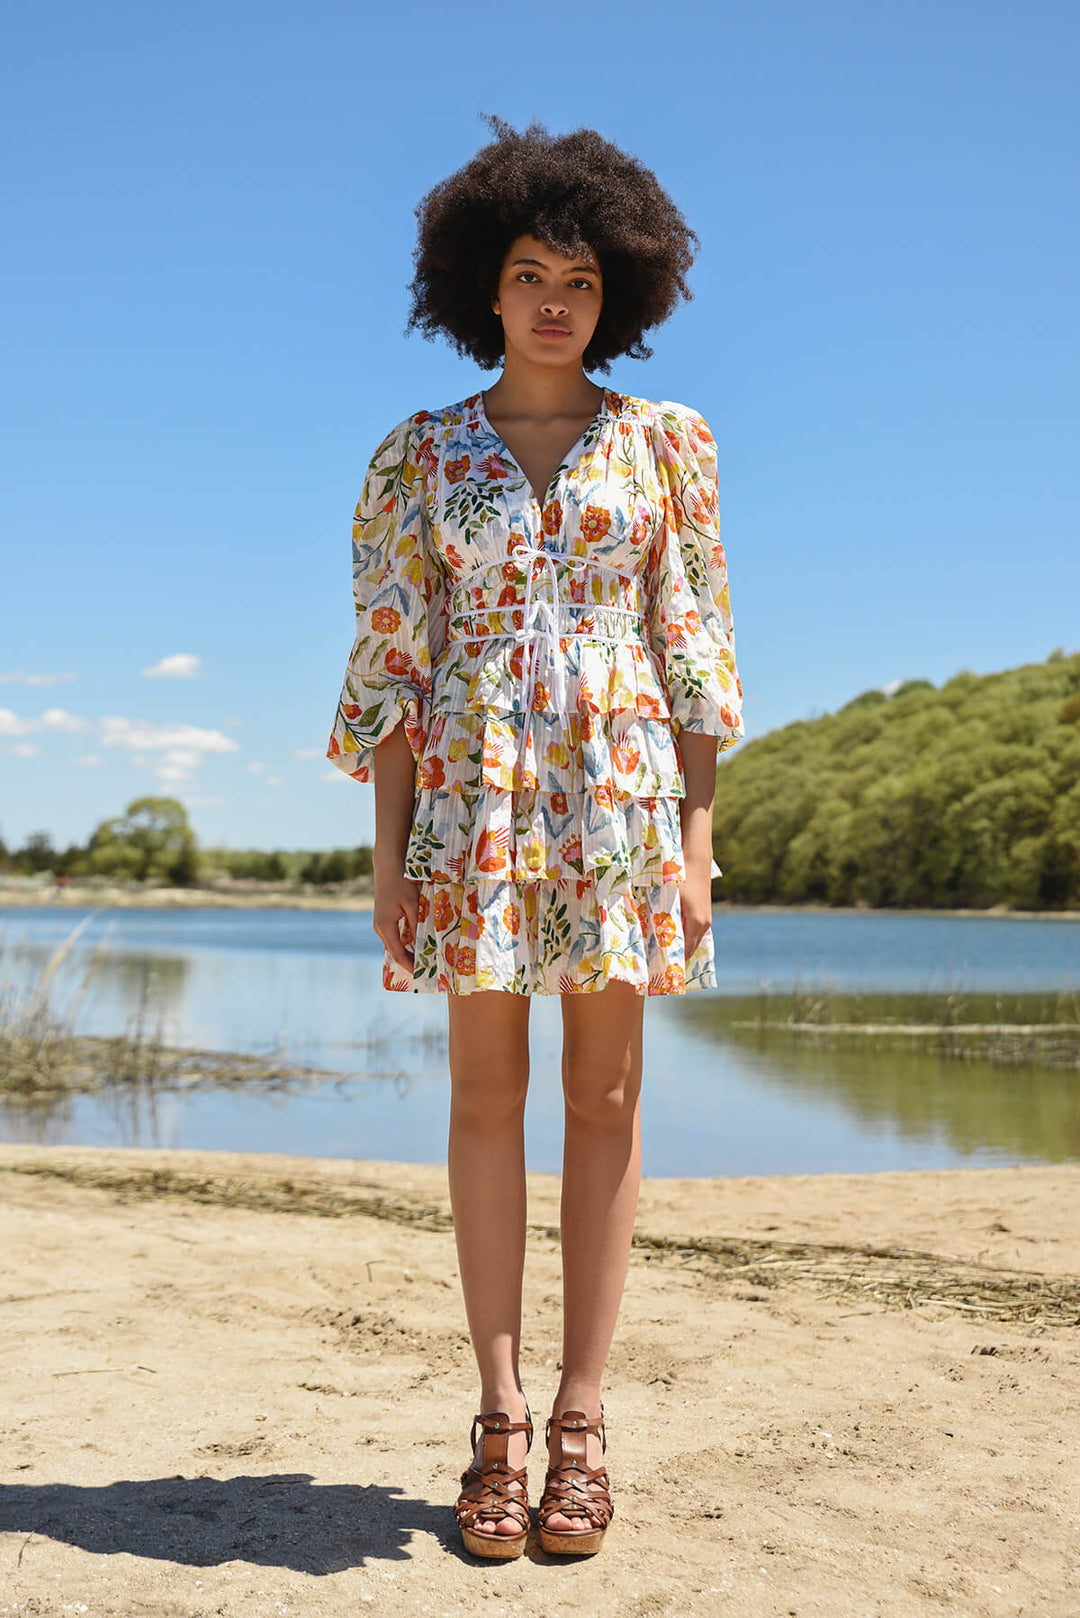 A lady with long legs stands by a lake while wearing a 3/4 sleeve mini dress with a floral print.